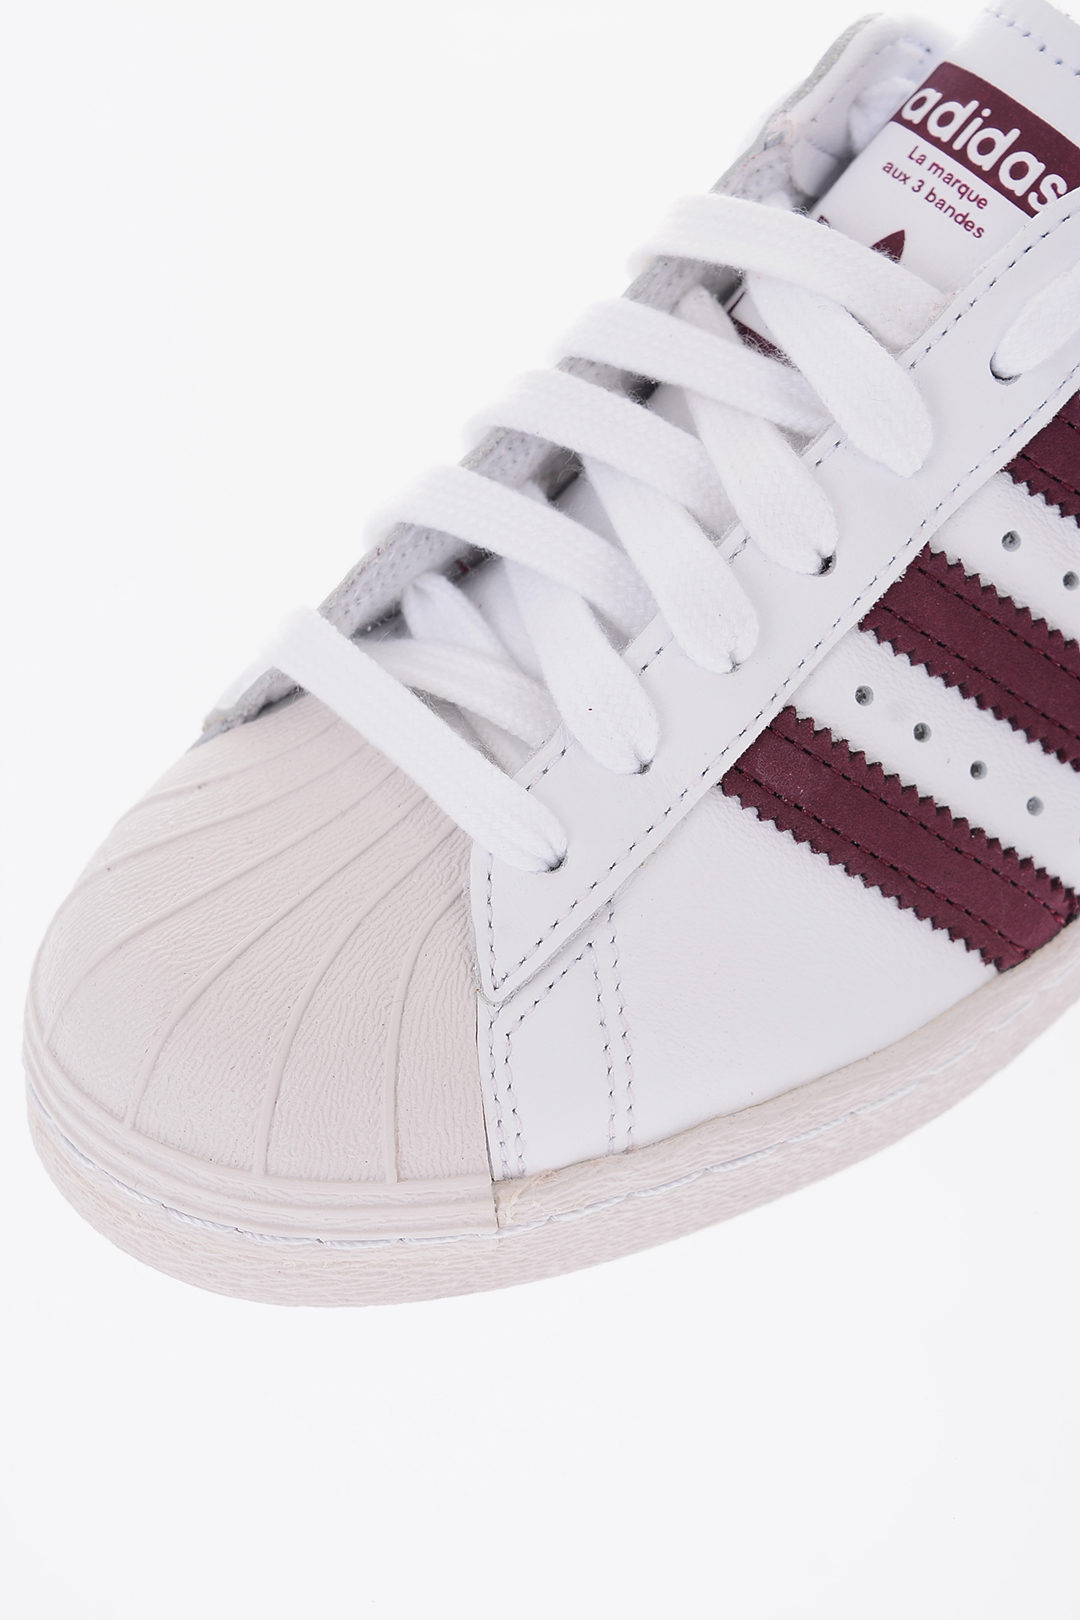 oveja blanco bosquejo Adidas leather SUPERSTAR 80s sneakers unisex men women - Glamood Outlet